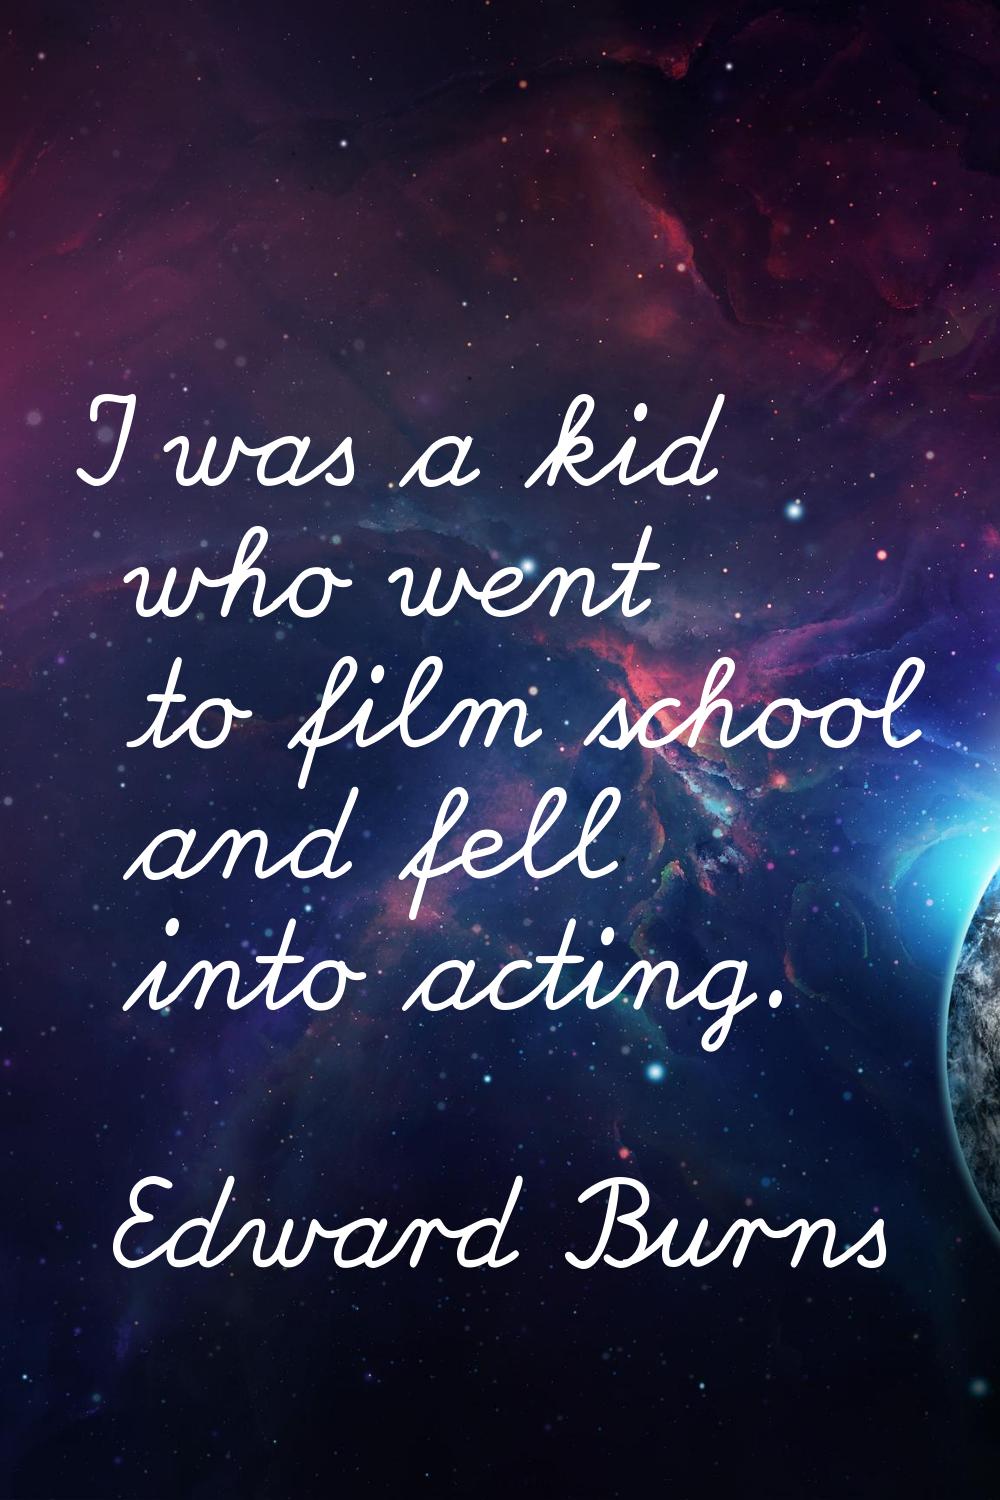 I was a kid who went to film school and fell into acting.